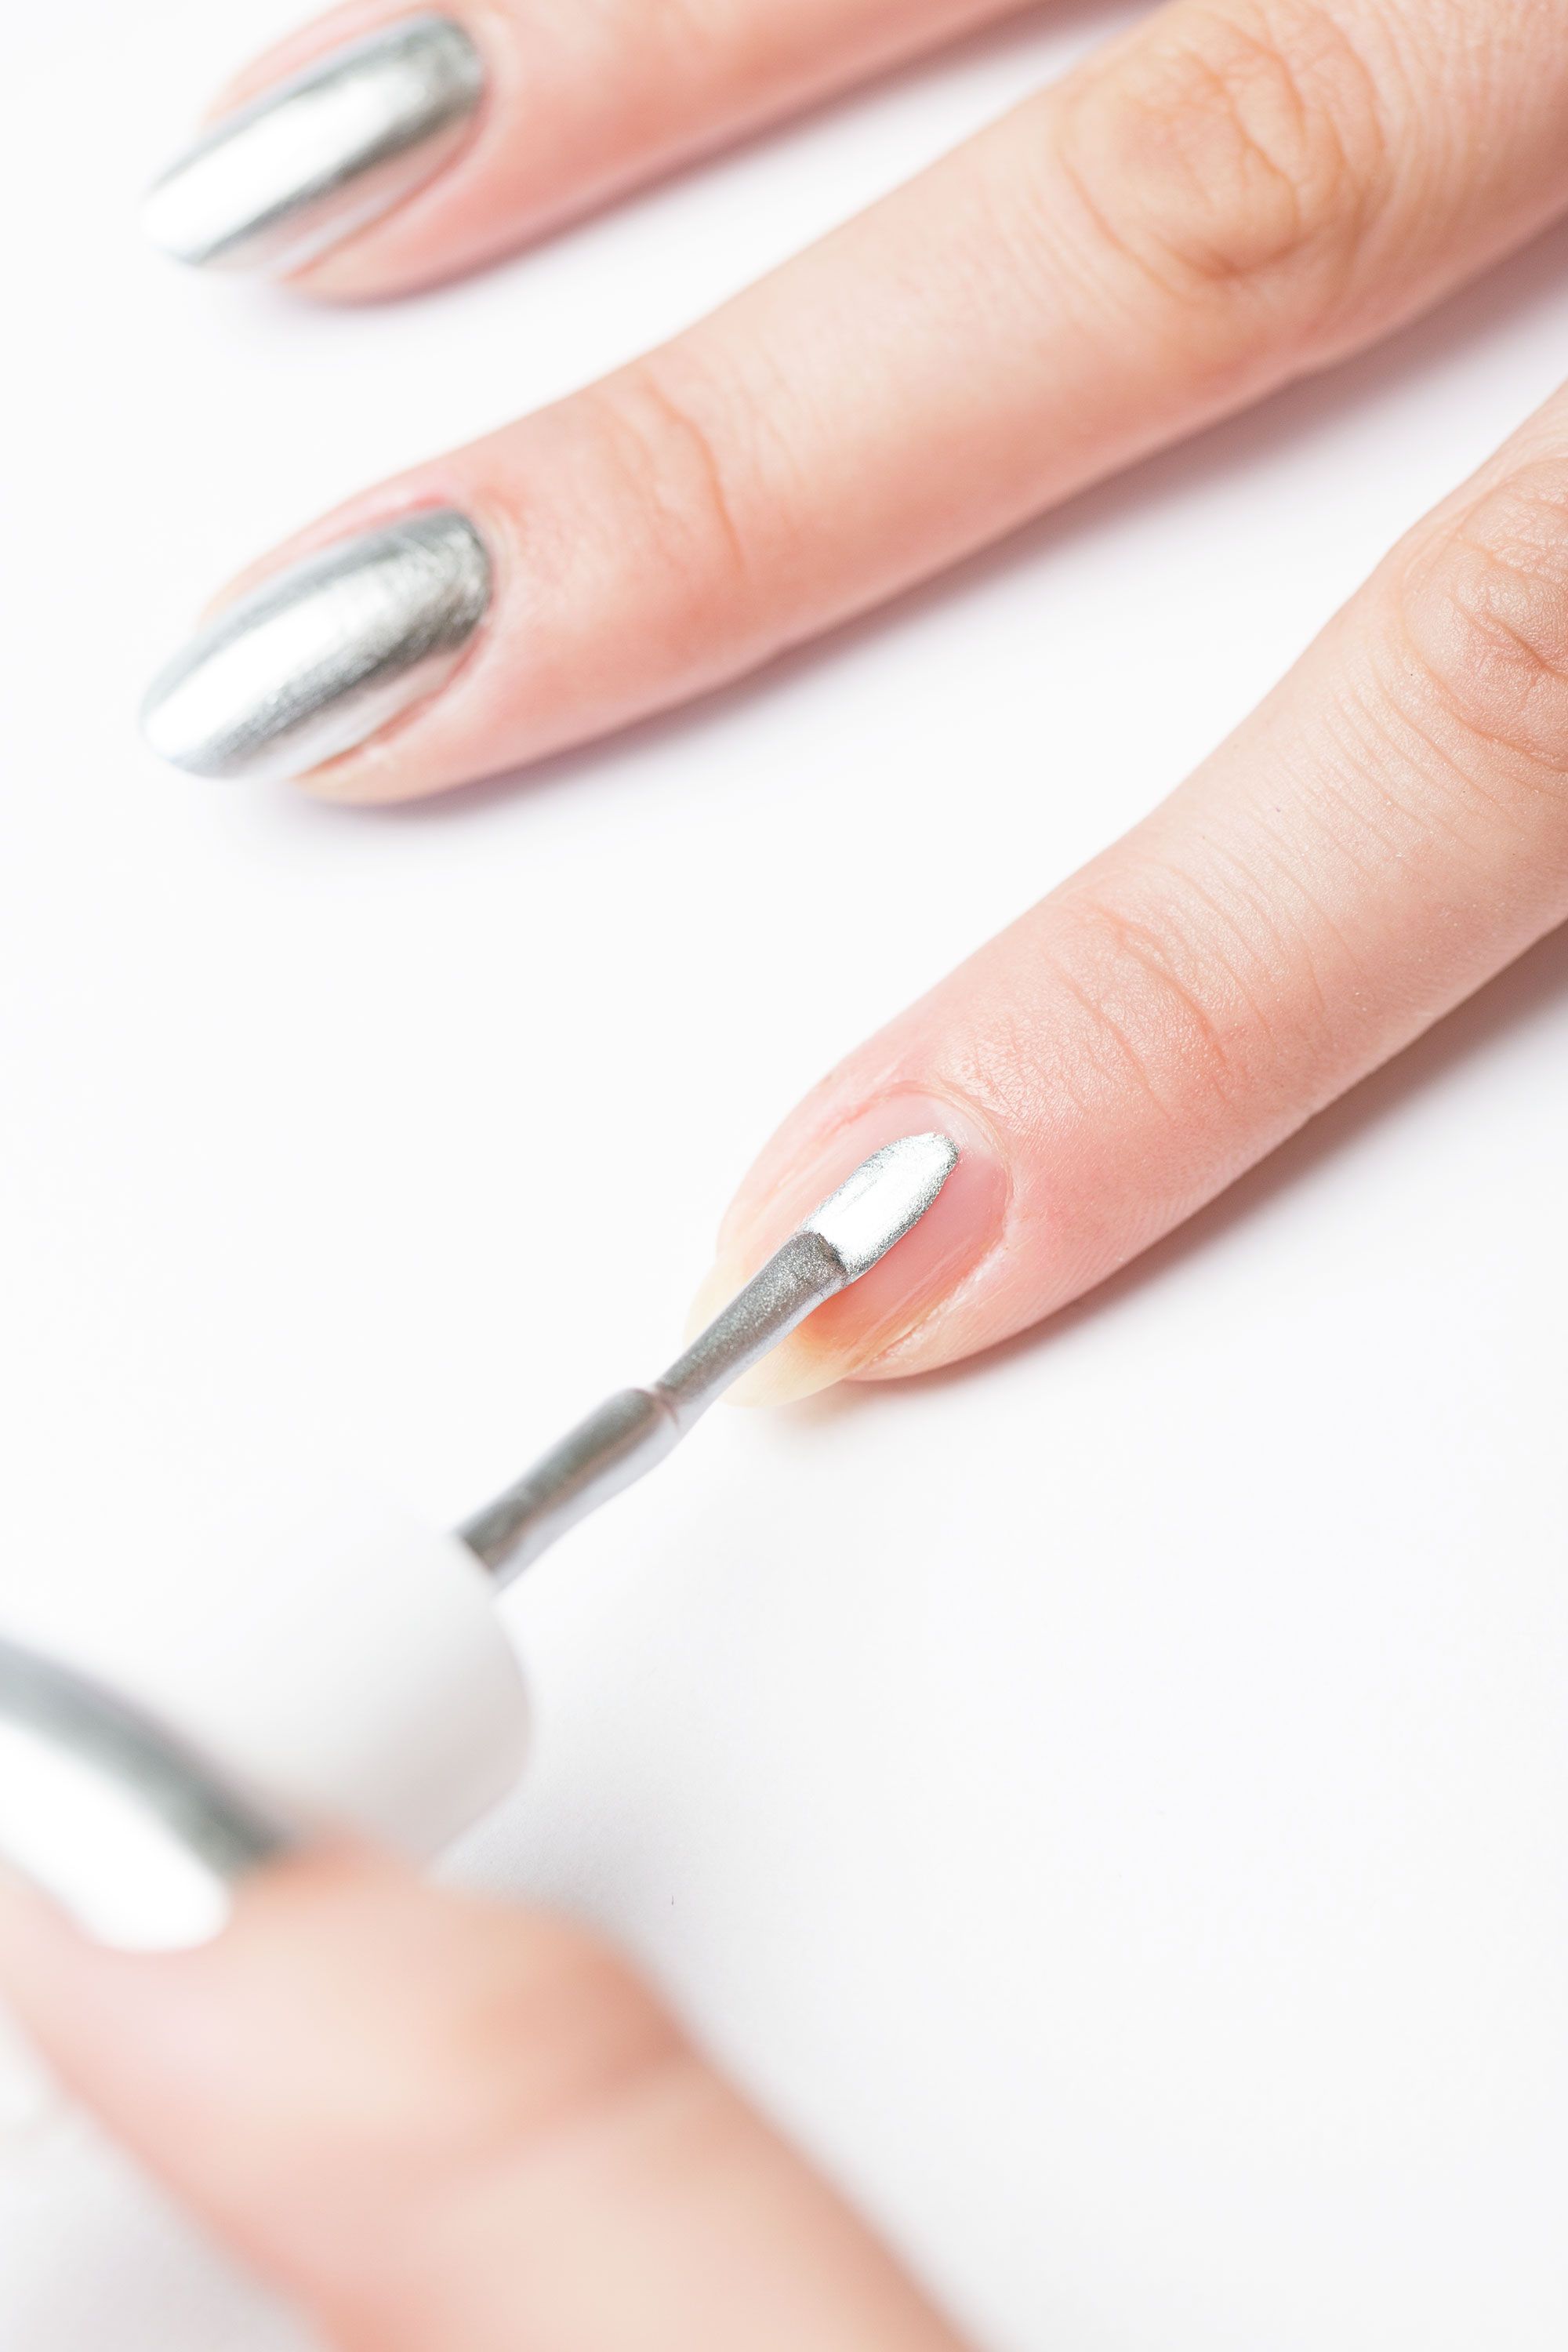 DIY Nail Art for Beginners Without Tools | ILMP Blogs